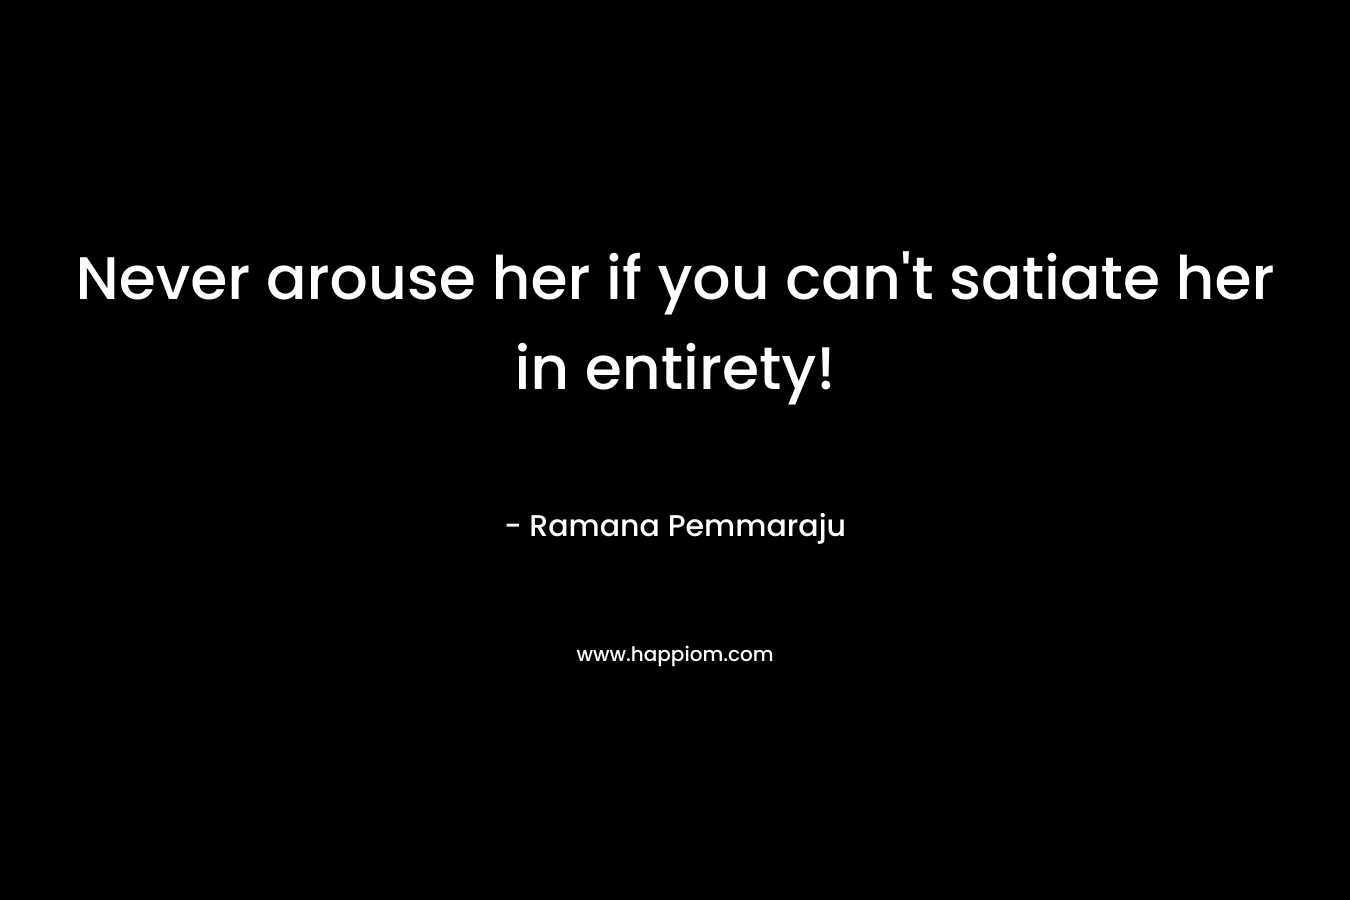 Never arouse her if you can't satiate her in entirety!